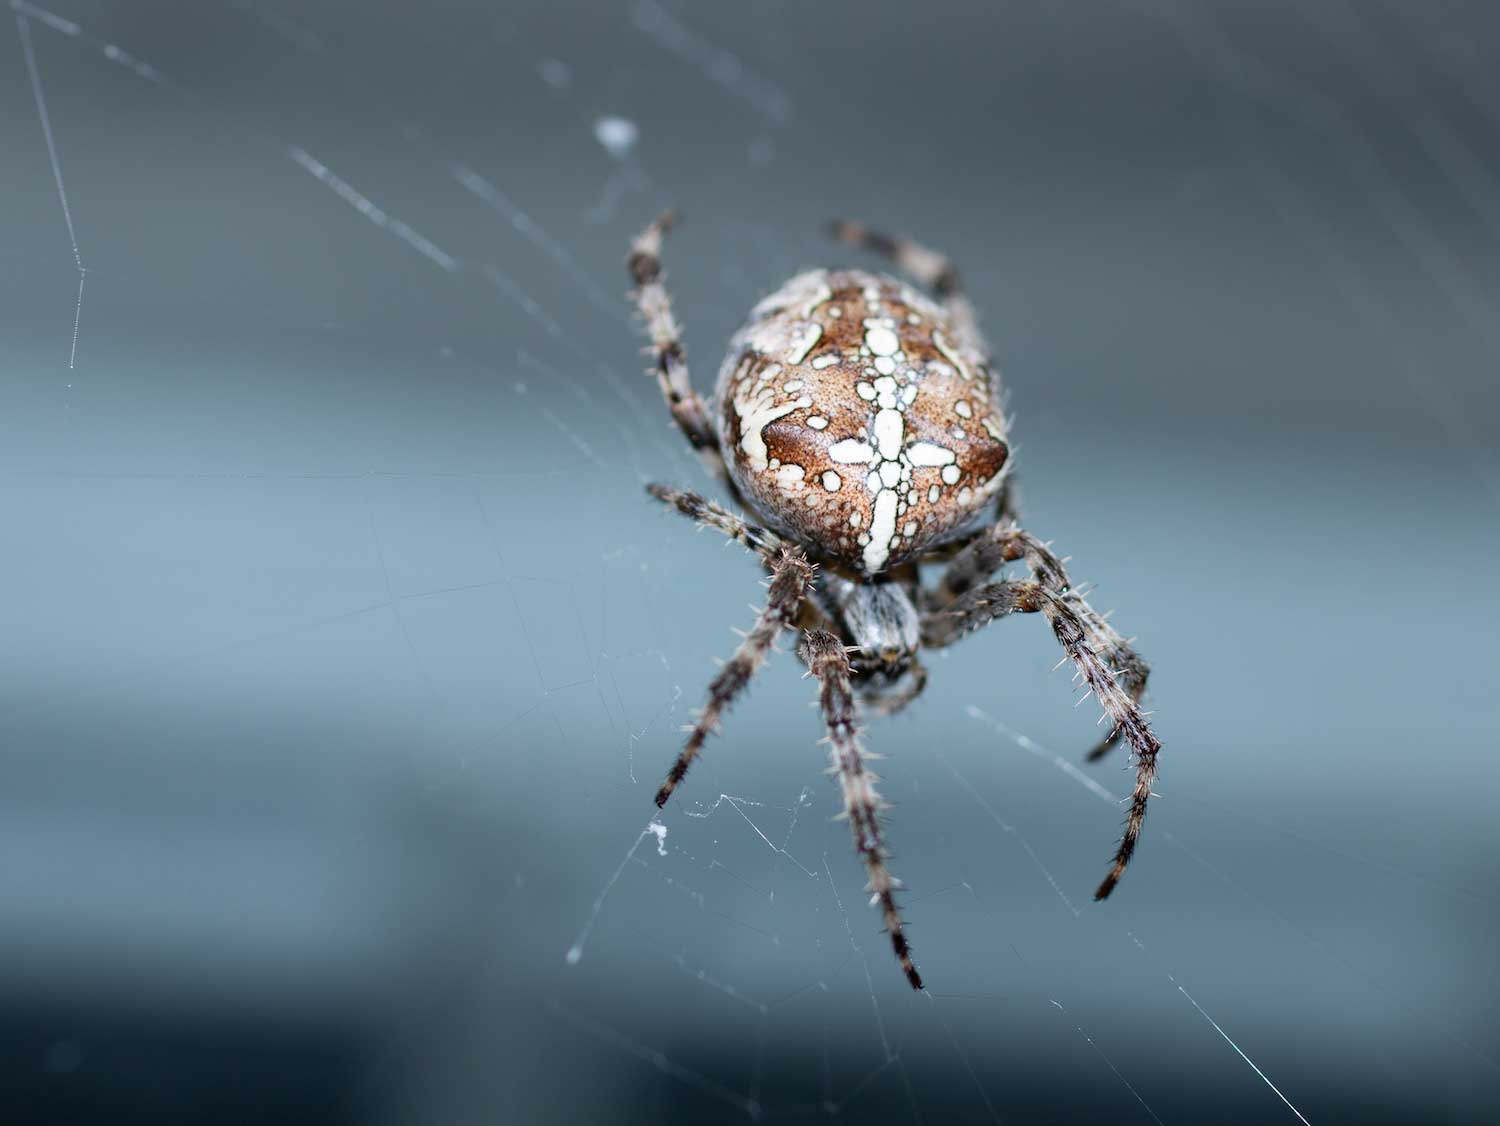 Keep an Eye Out for Spiders This Fall